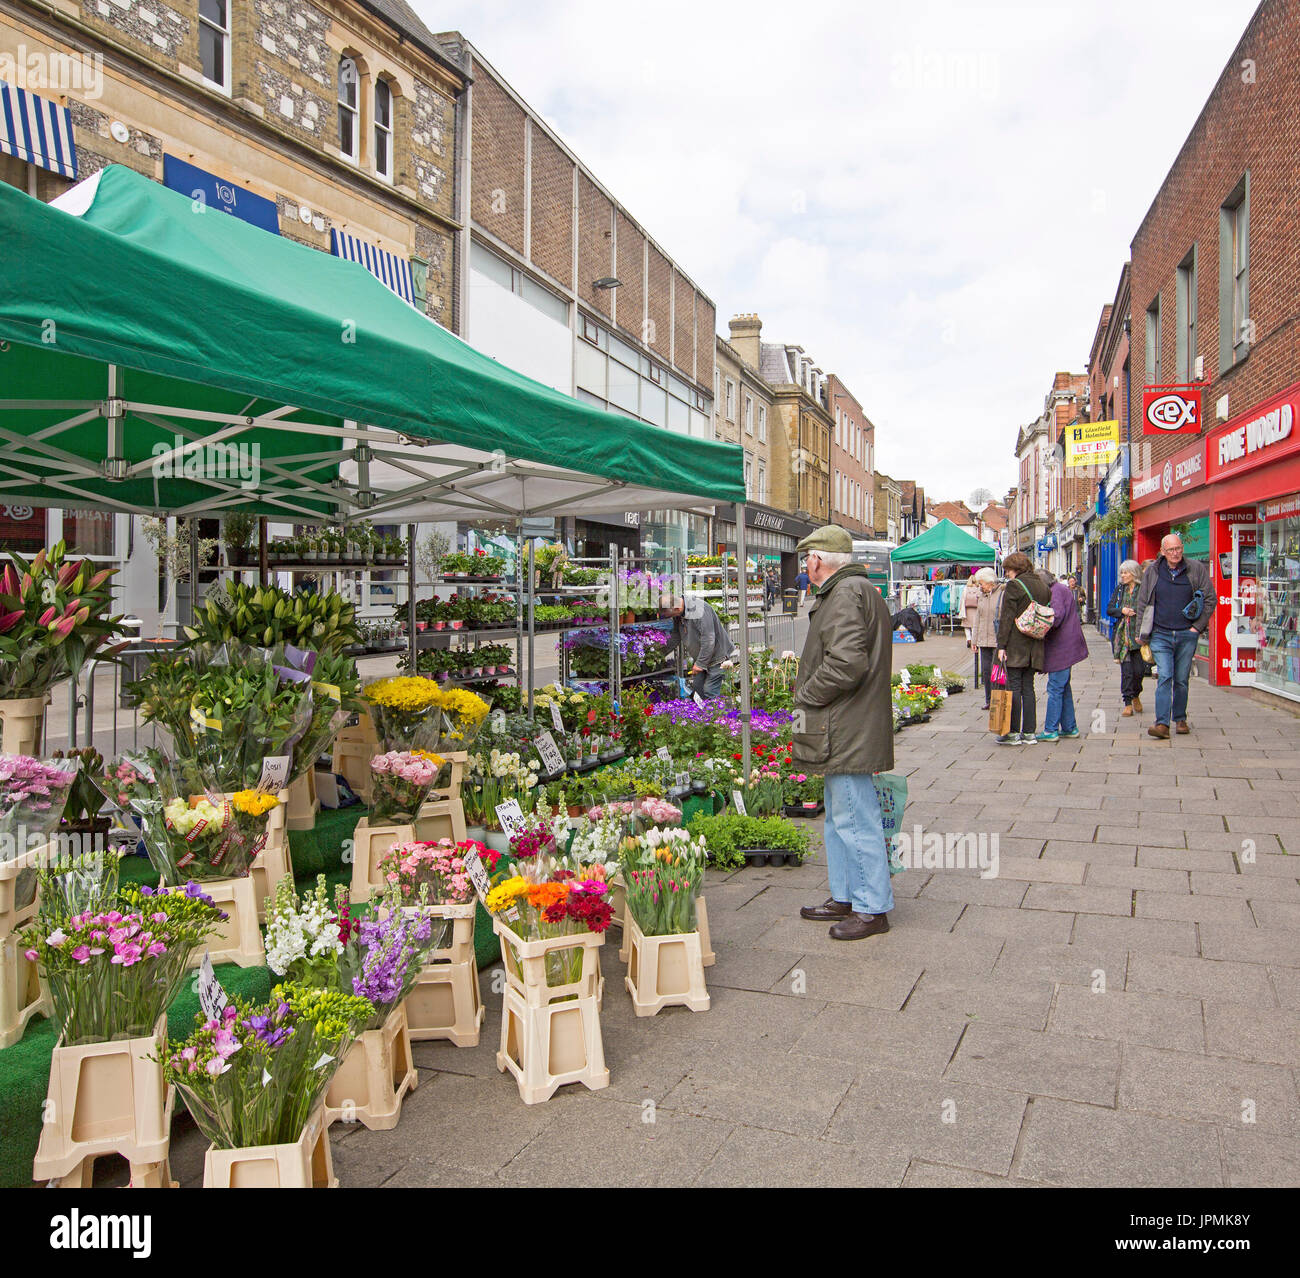 Flower stall with elderly man looking at colourful display of fresh flowers under green & white awning at street market in Winchester, England Stock Photo